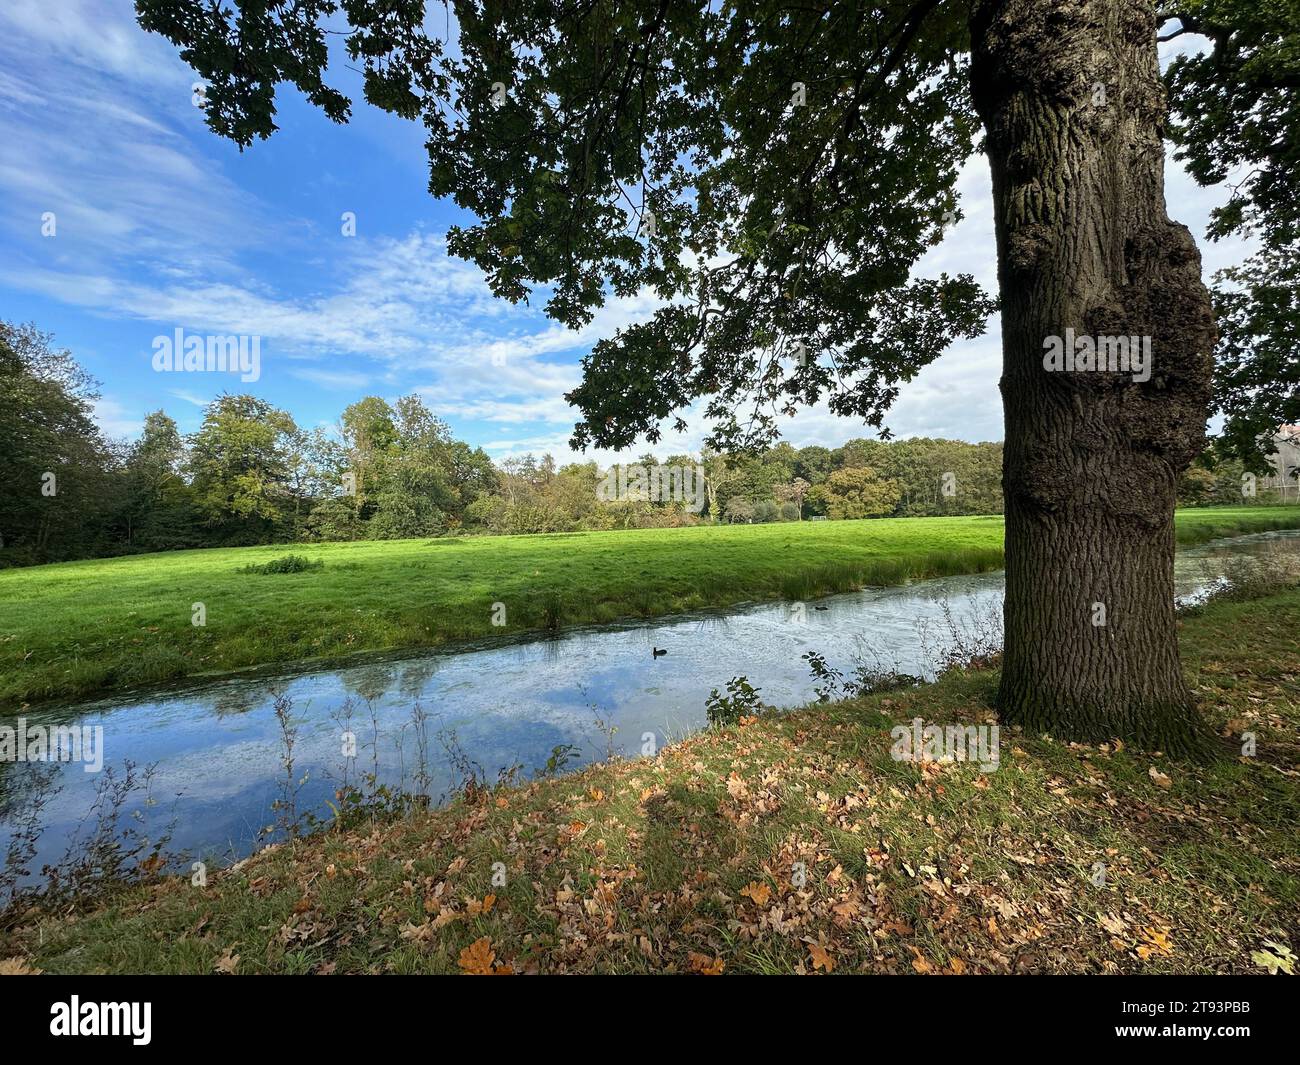 Beautiful water channel, green grass and trees in park Stock Photo